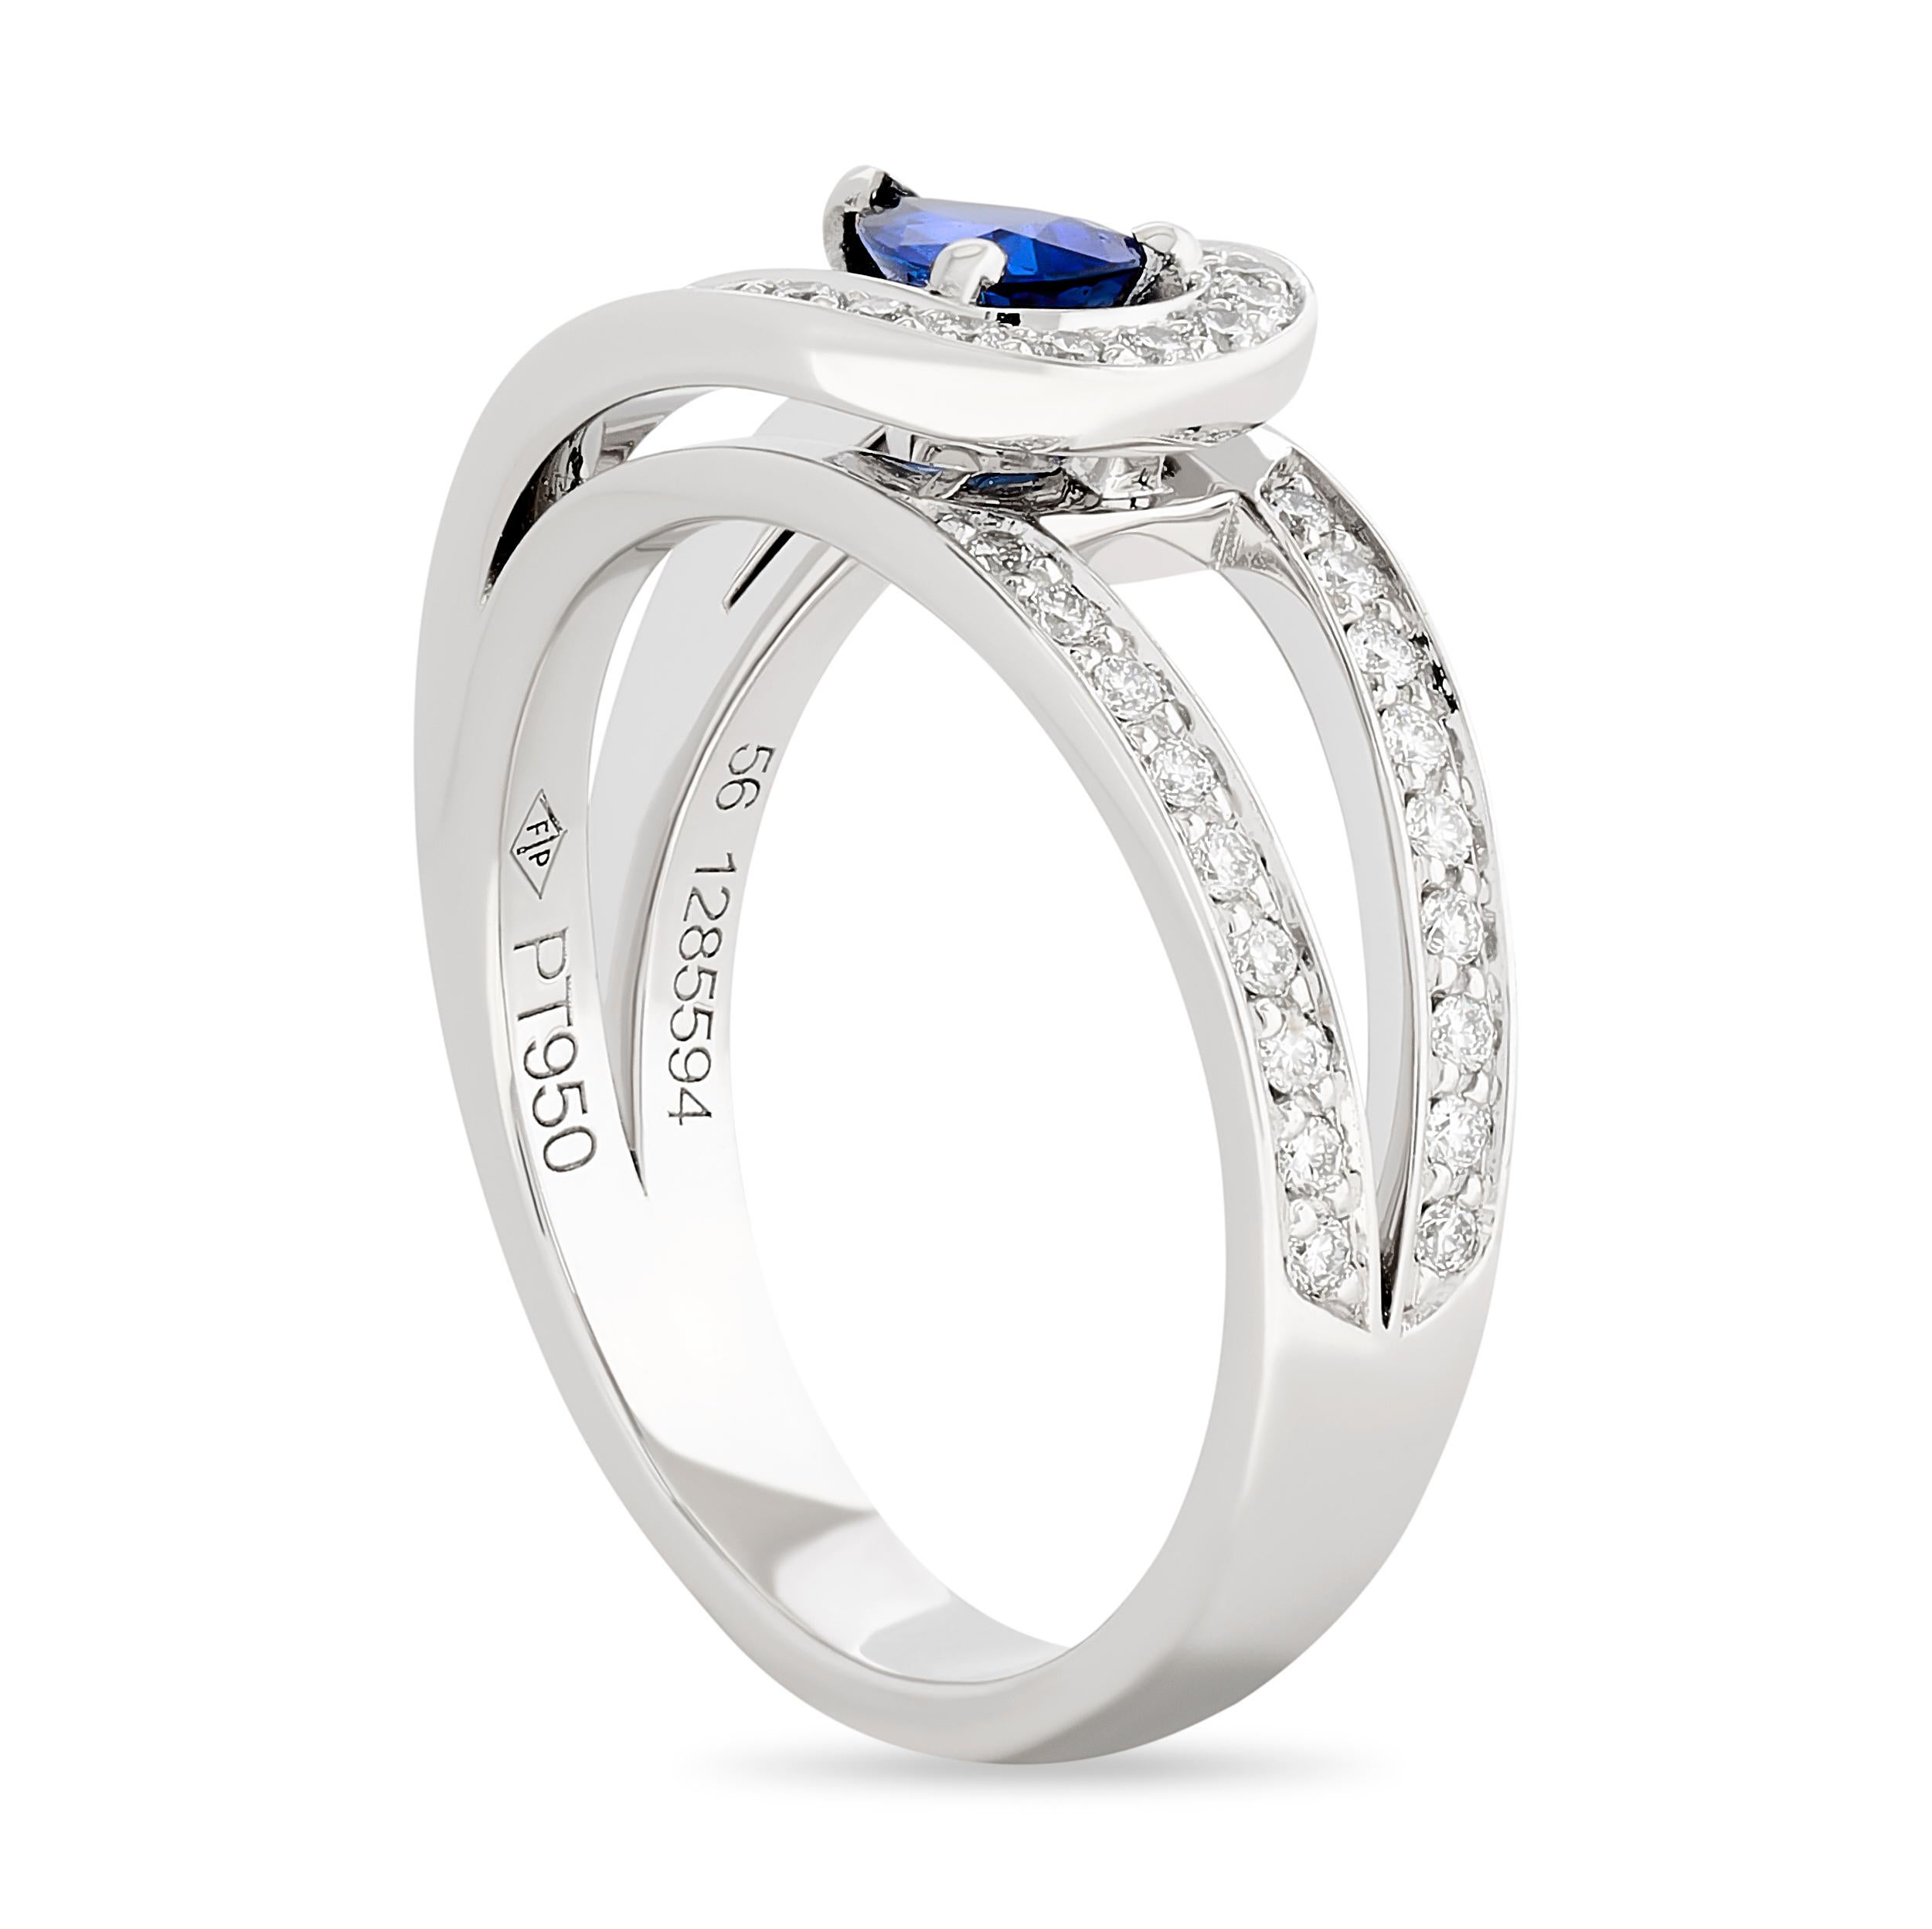 This Fred of Paris Lovelight ring is a timeless masterpiece that captures the essence of refined beauty - a pear-shaped sapphire takes center stage, embraced by a graceful bend of sparkling diamonds. 

The pear sapphire weighs approximately 0.46